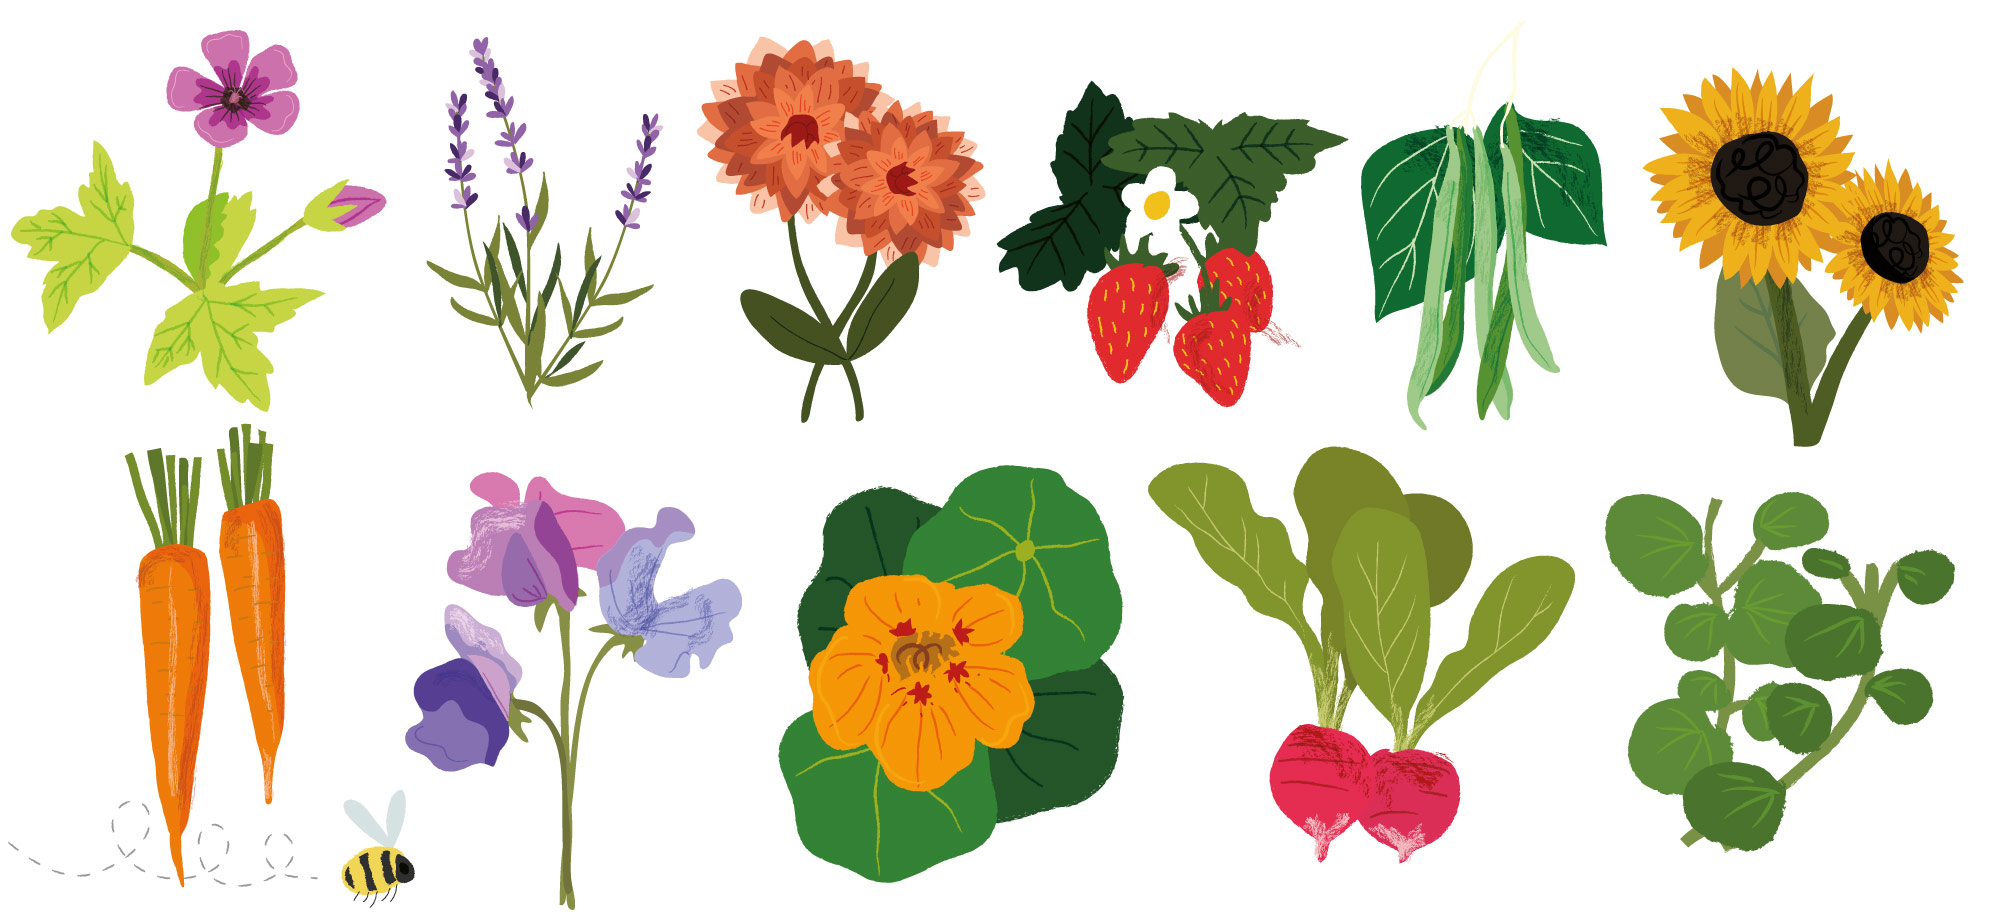 Plants illustrated by Elly Jahnz for 2020 Nature Month by Month